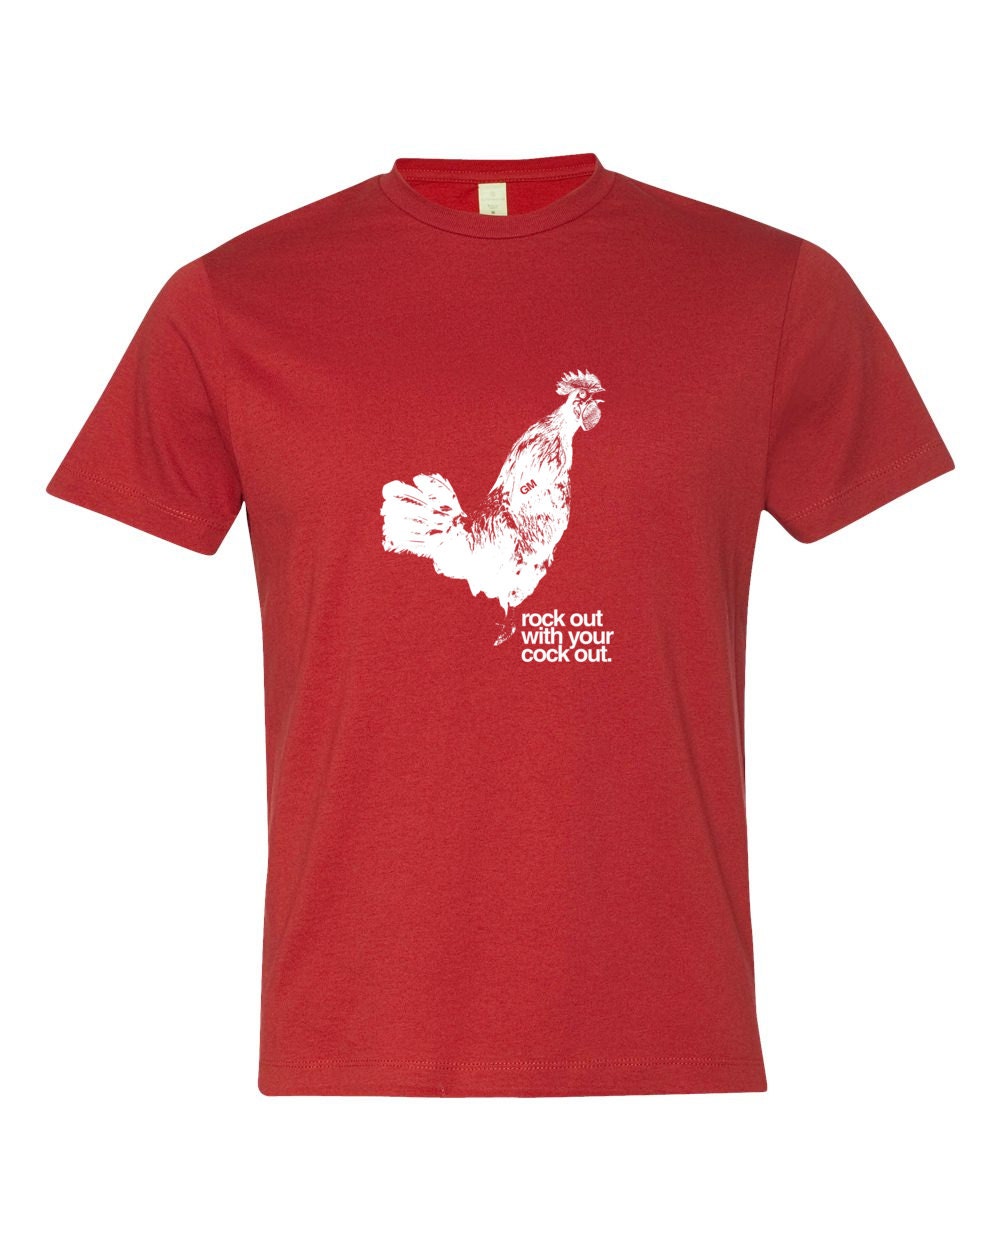 Rooster T-shirt En Blanco ,chicken, Cock, Cock Out, Rock Out, Comb ...